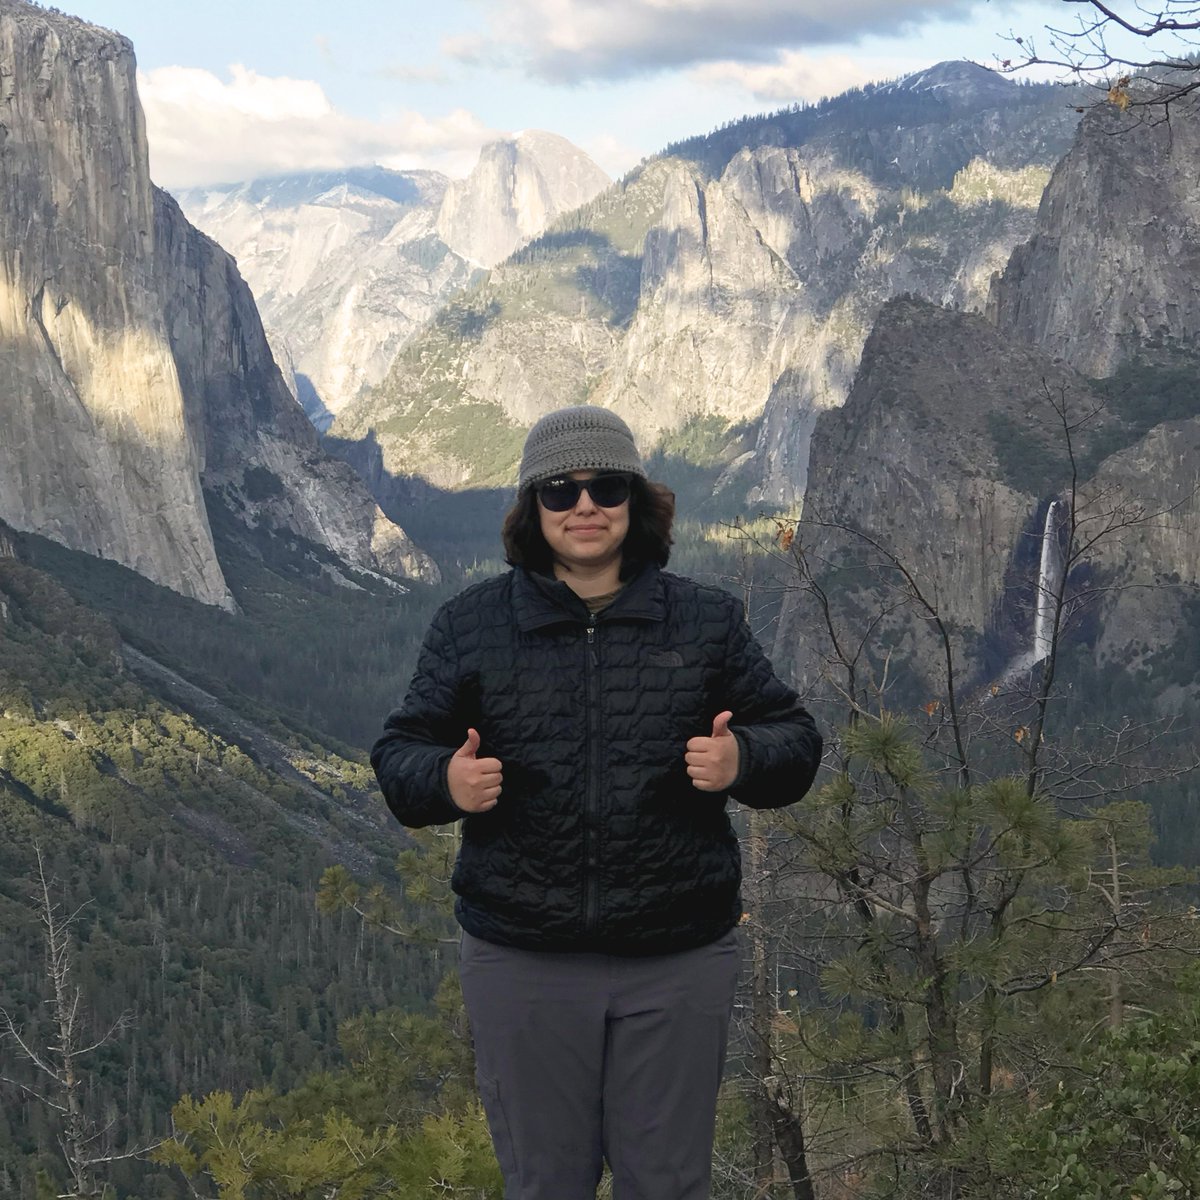 NatureBridge proudly partners with @YoseConservancy and @NatlParkService in offering WildLink, which invites students from communities who encounter barriers to accessing the outdoors to explore Yosemite. Congrats to Kai Diaz, WildLink alum and our 2024 Student of the Year!